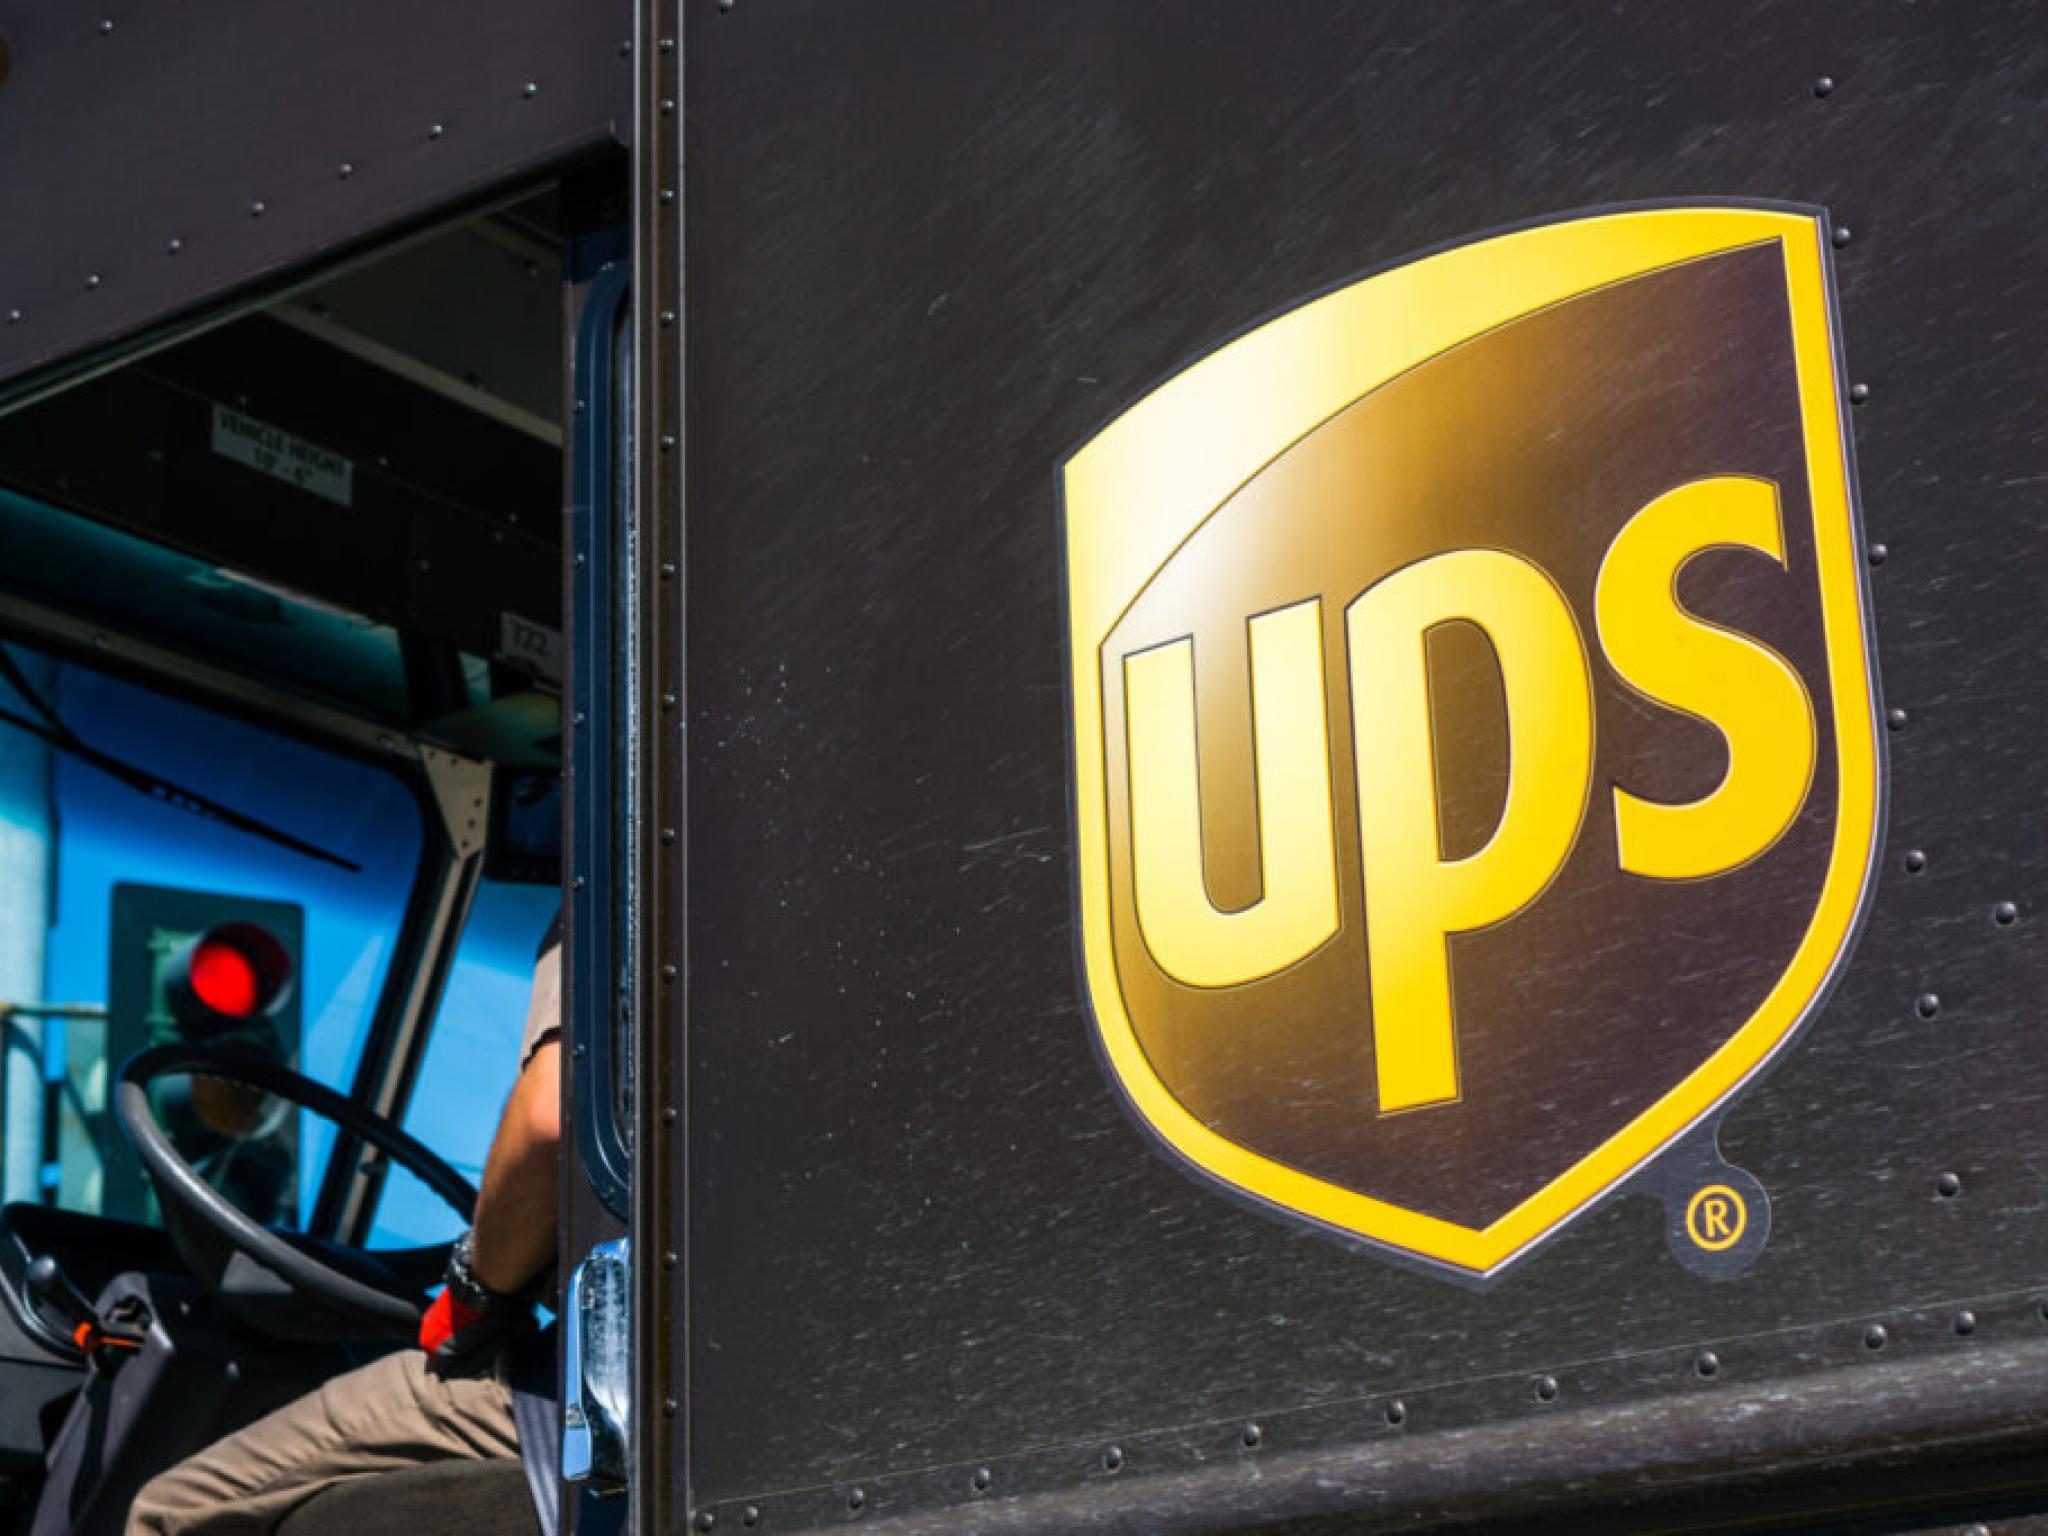  ups-stock-rises-after-fedex-earnings-beat 